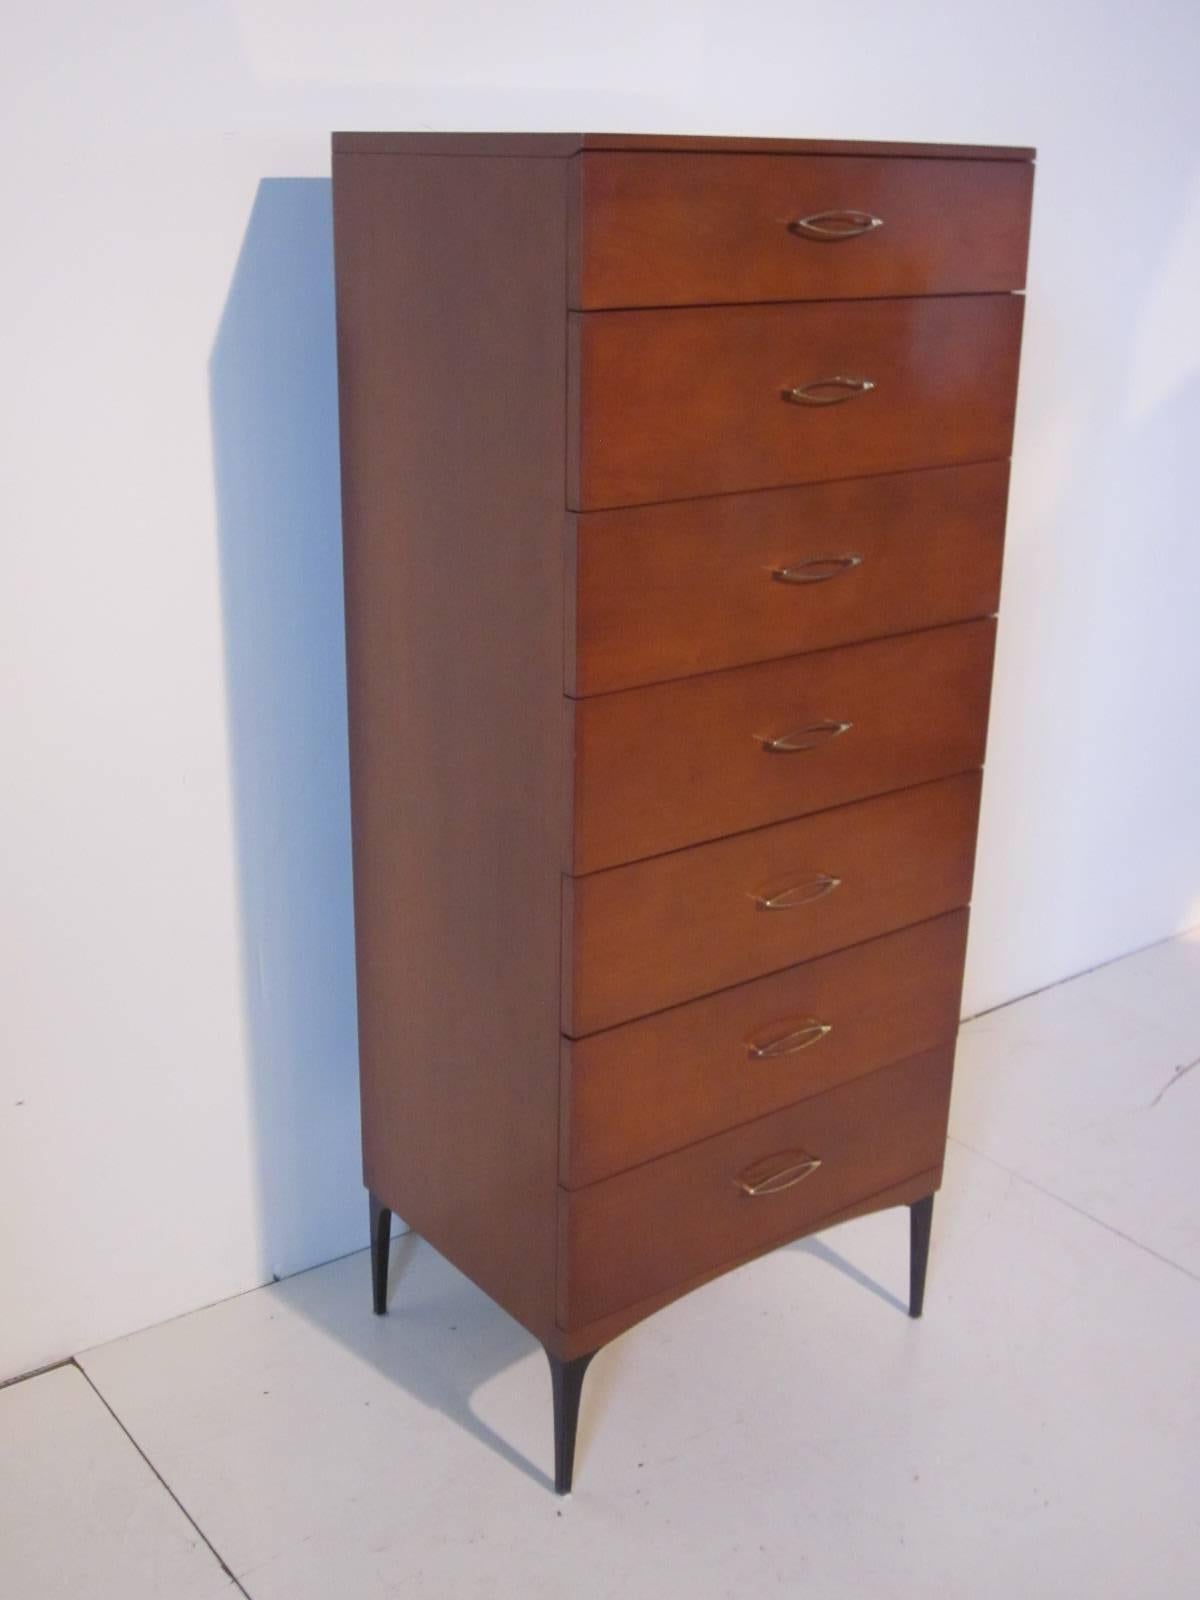 A seven-drawer mahogany tall lingerie or gentleman's chest with very simple elliptical brass handles sitting on tapered black legs. Retains the manufactures label to the top drawer Heywood-Wakefield Contessa Line of 1959, a rare and well designed